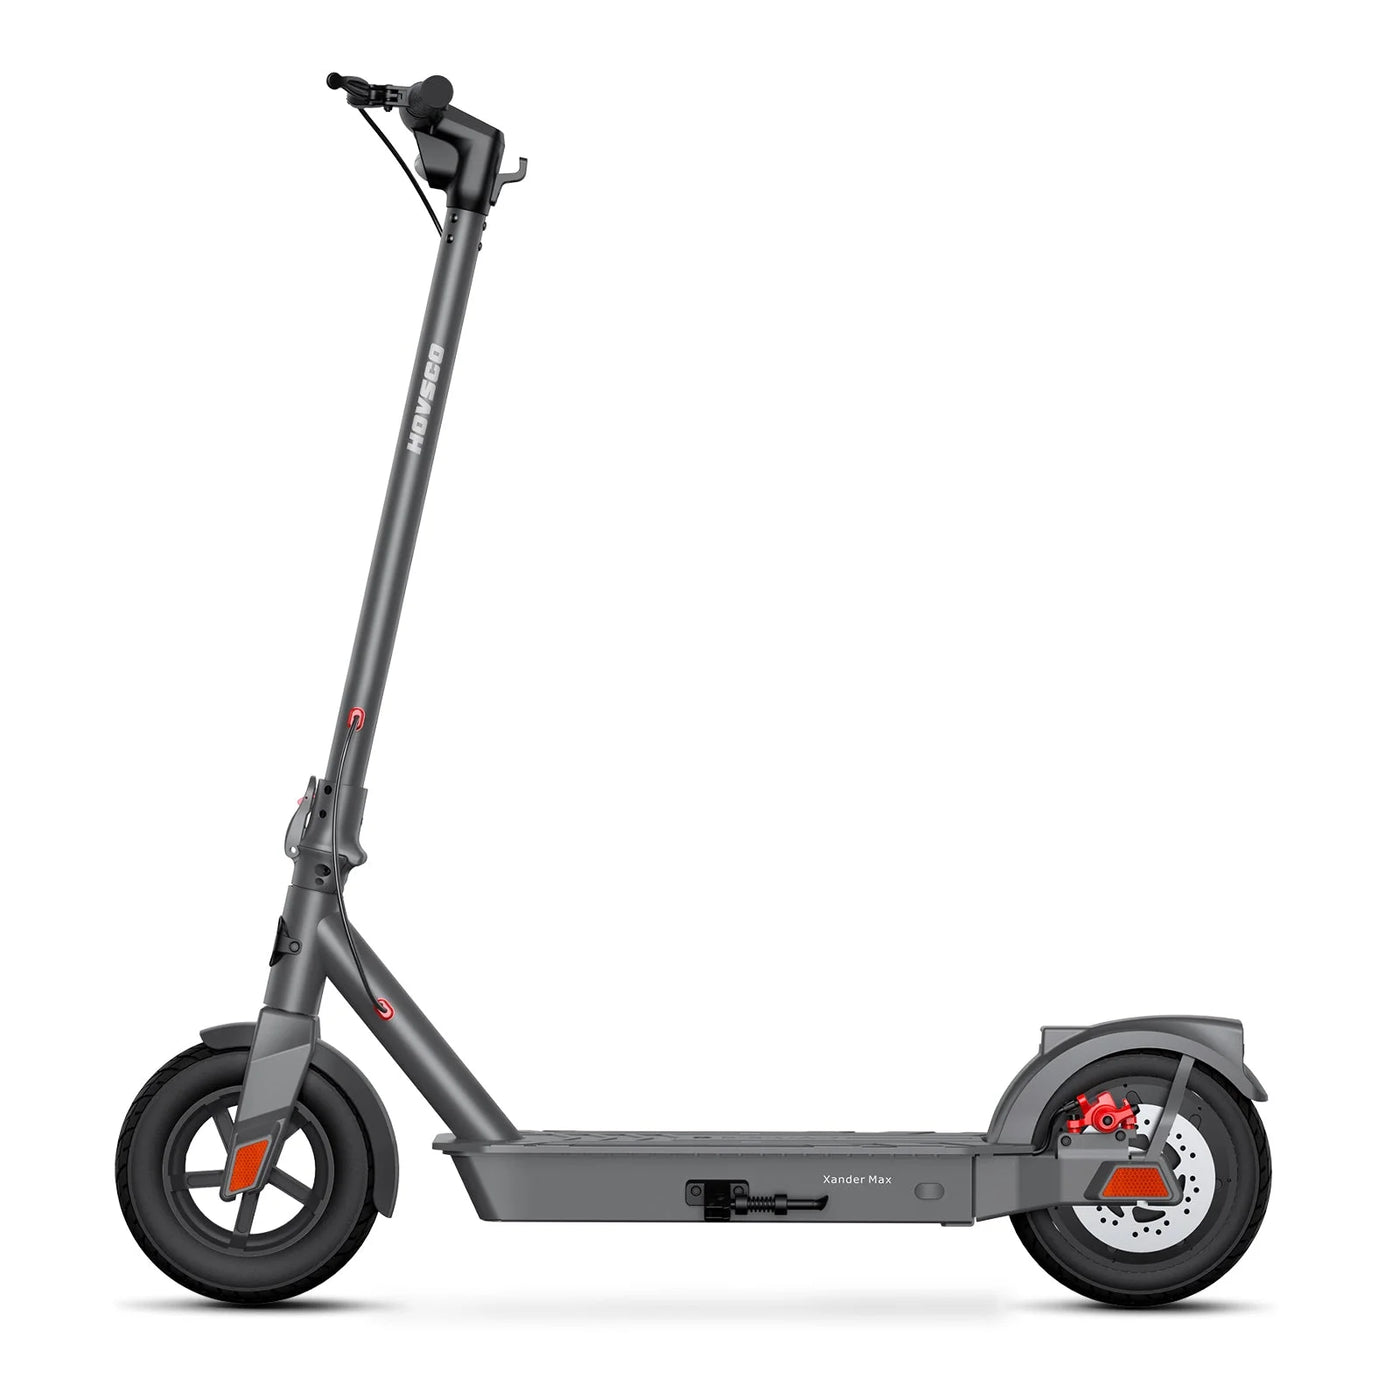 【New Arrival】HOVSCO™ Xander Max 10" Folding Electric Scooter For Adult HOVSCO